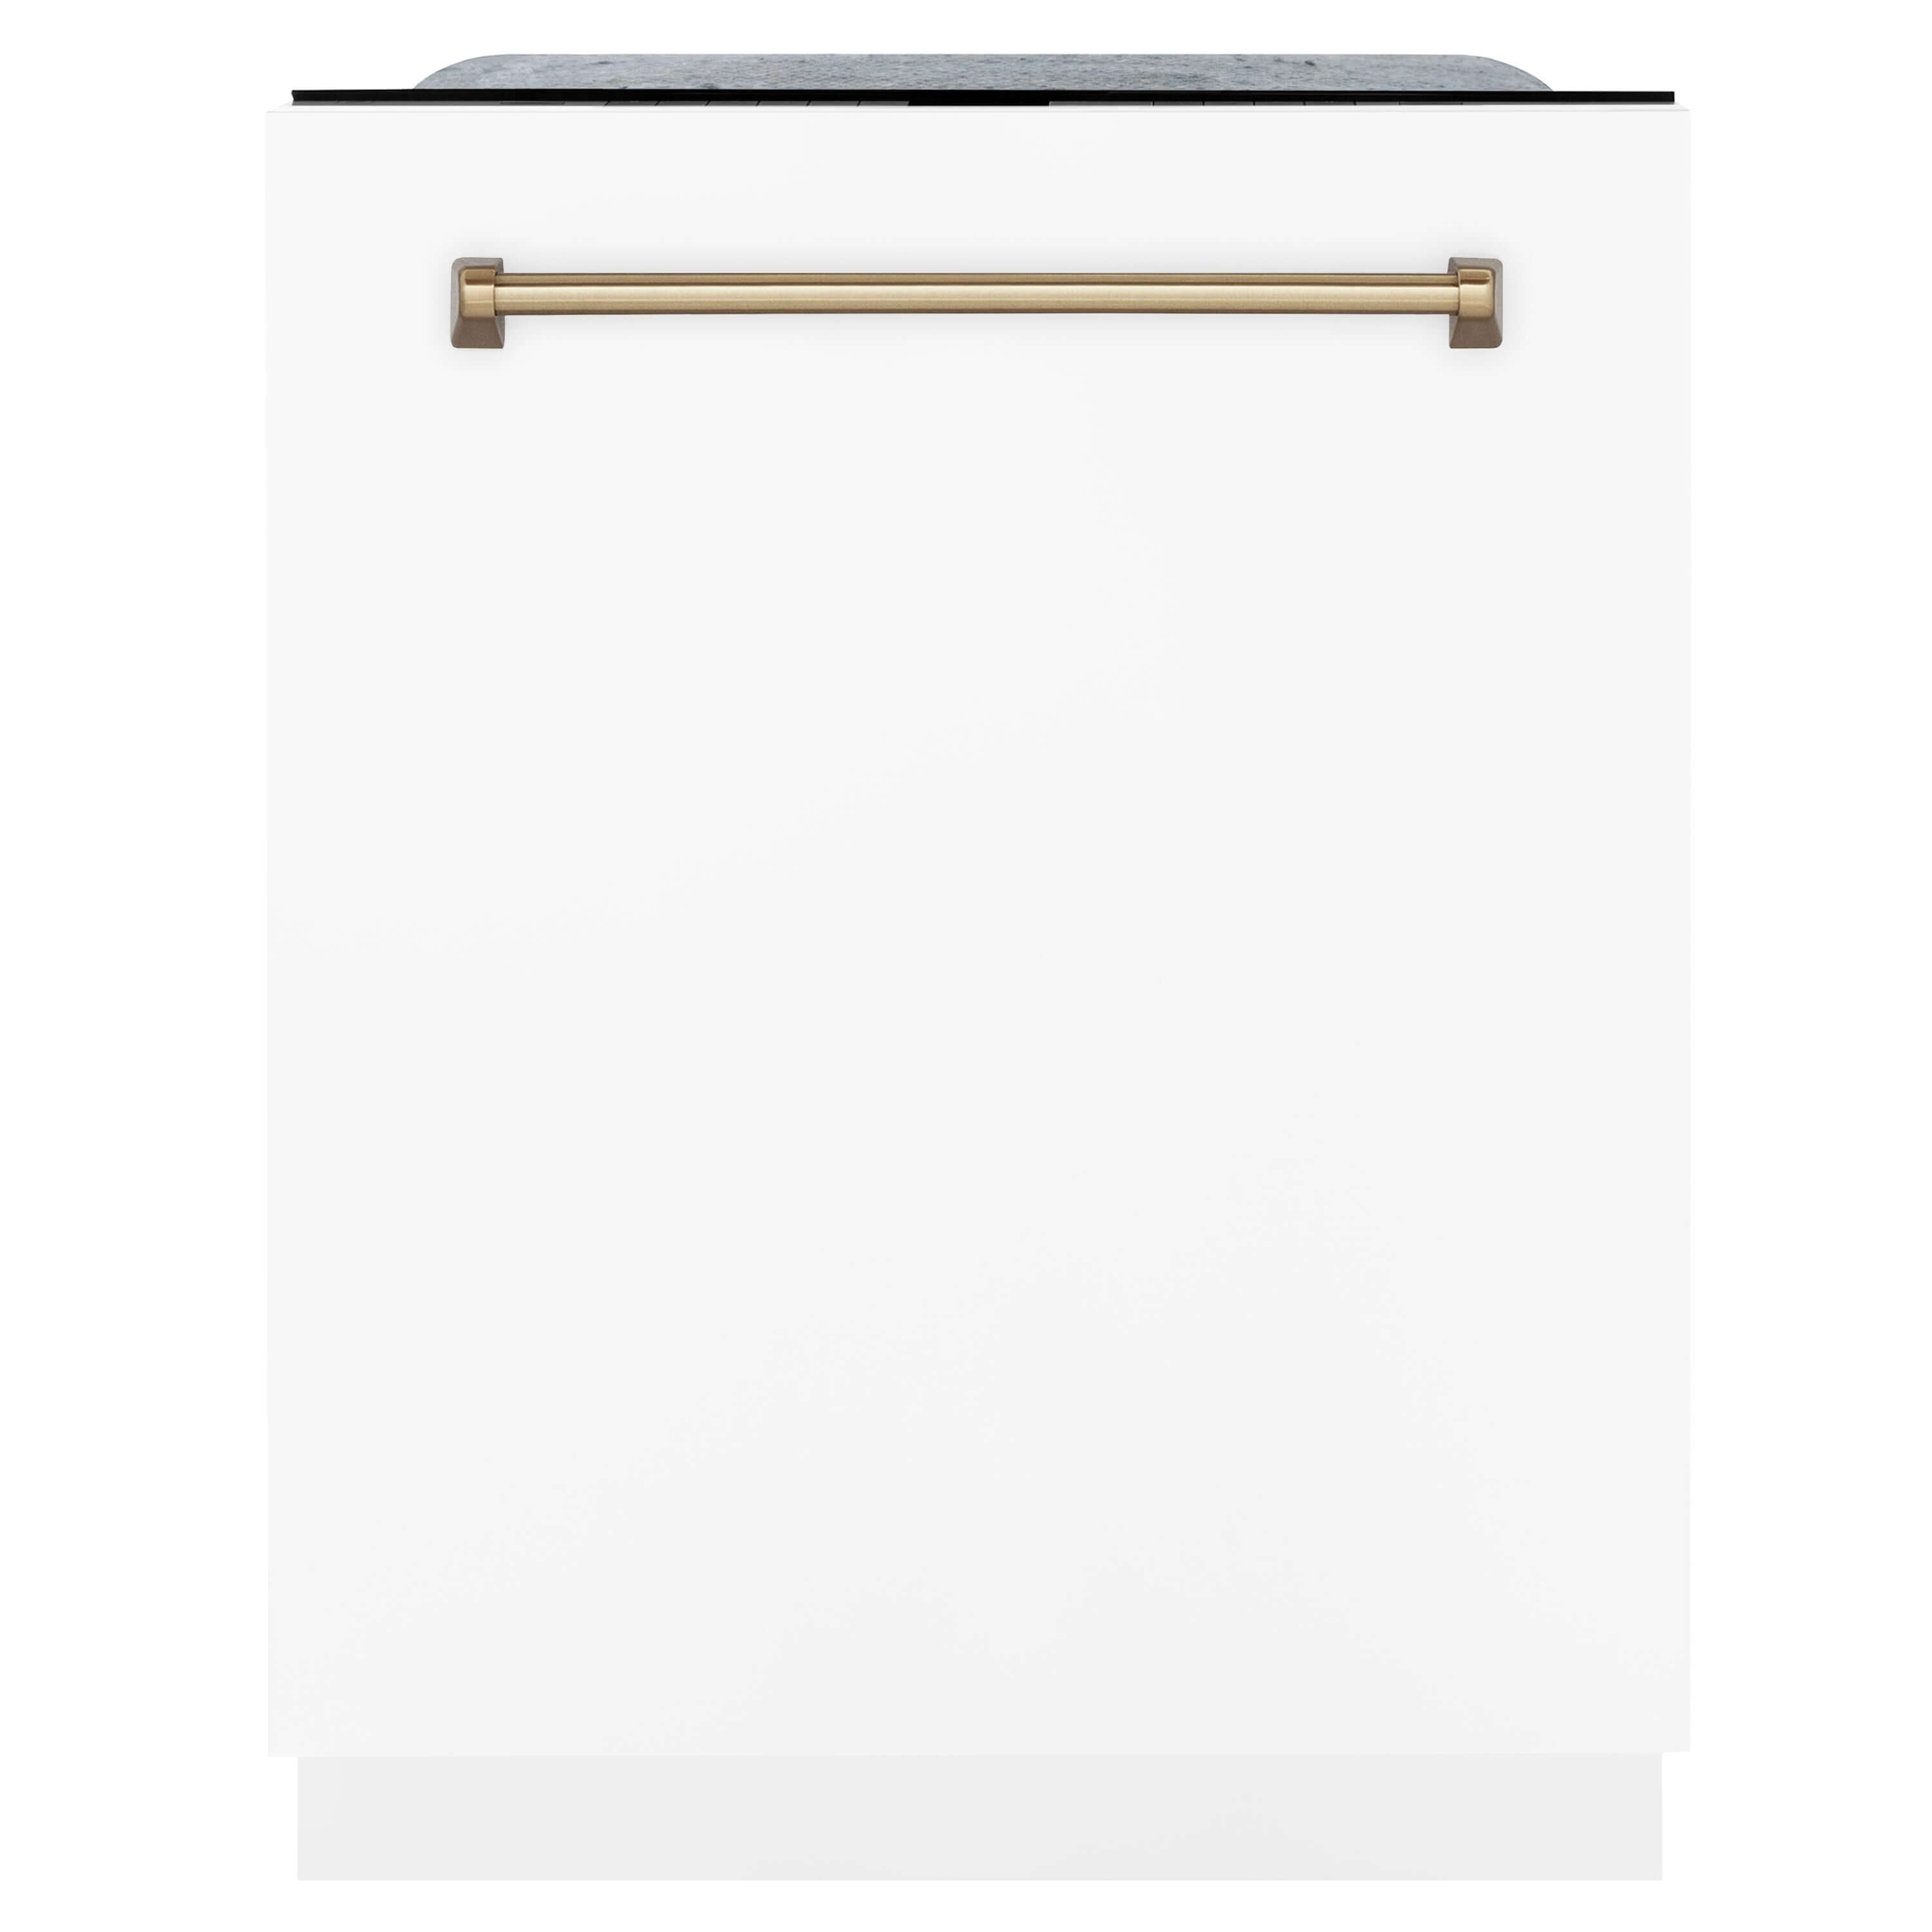 ZLINE 36 in. Autograph Edition Kitchen Package with Stainless Steel Dual Fuel Range with White Matte Door, Range Hood and Dishwasher with Champagne Bronze Accents (3AKP-RAWMRHDWM36-CB)